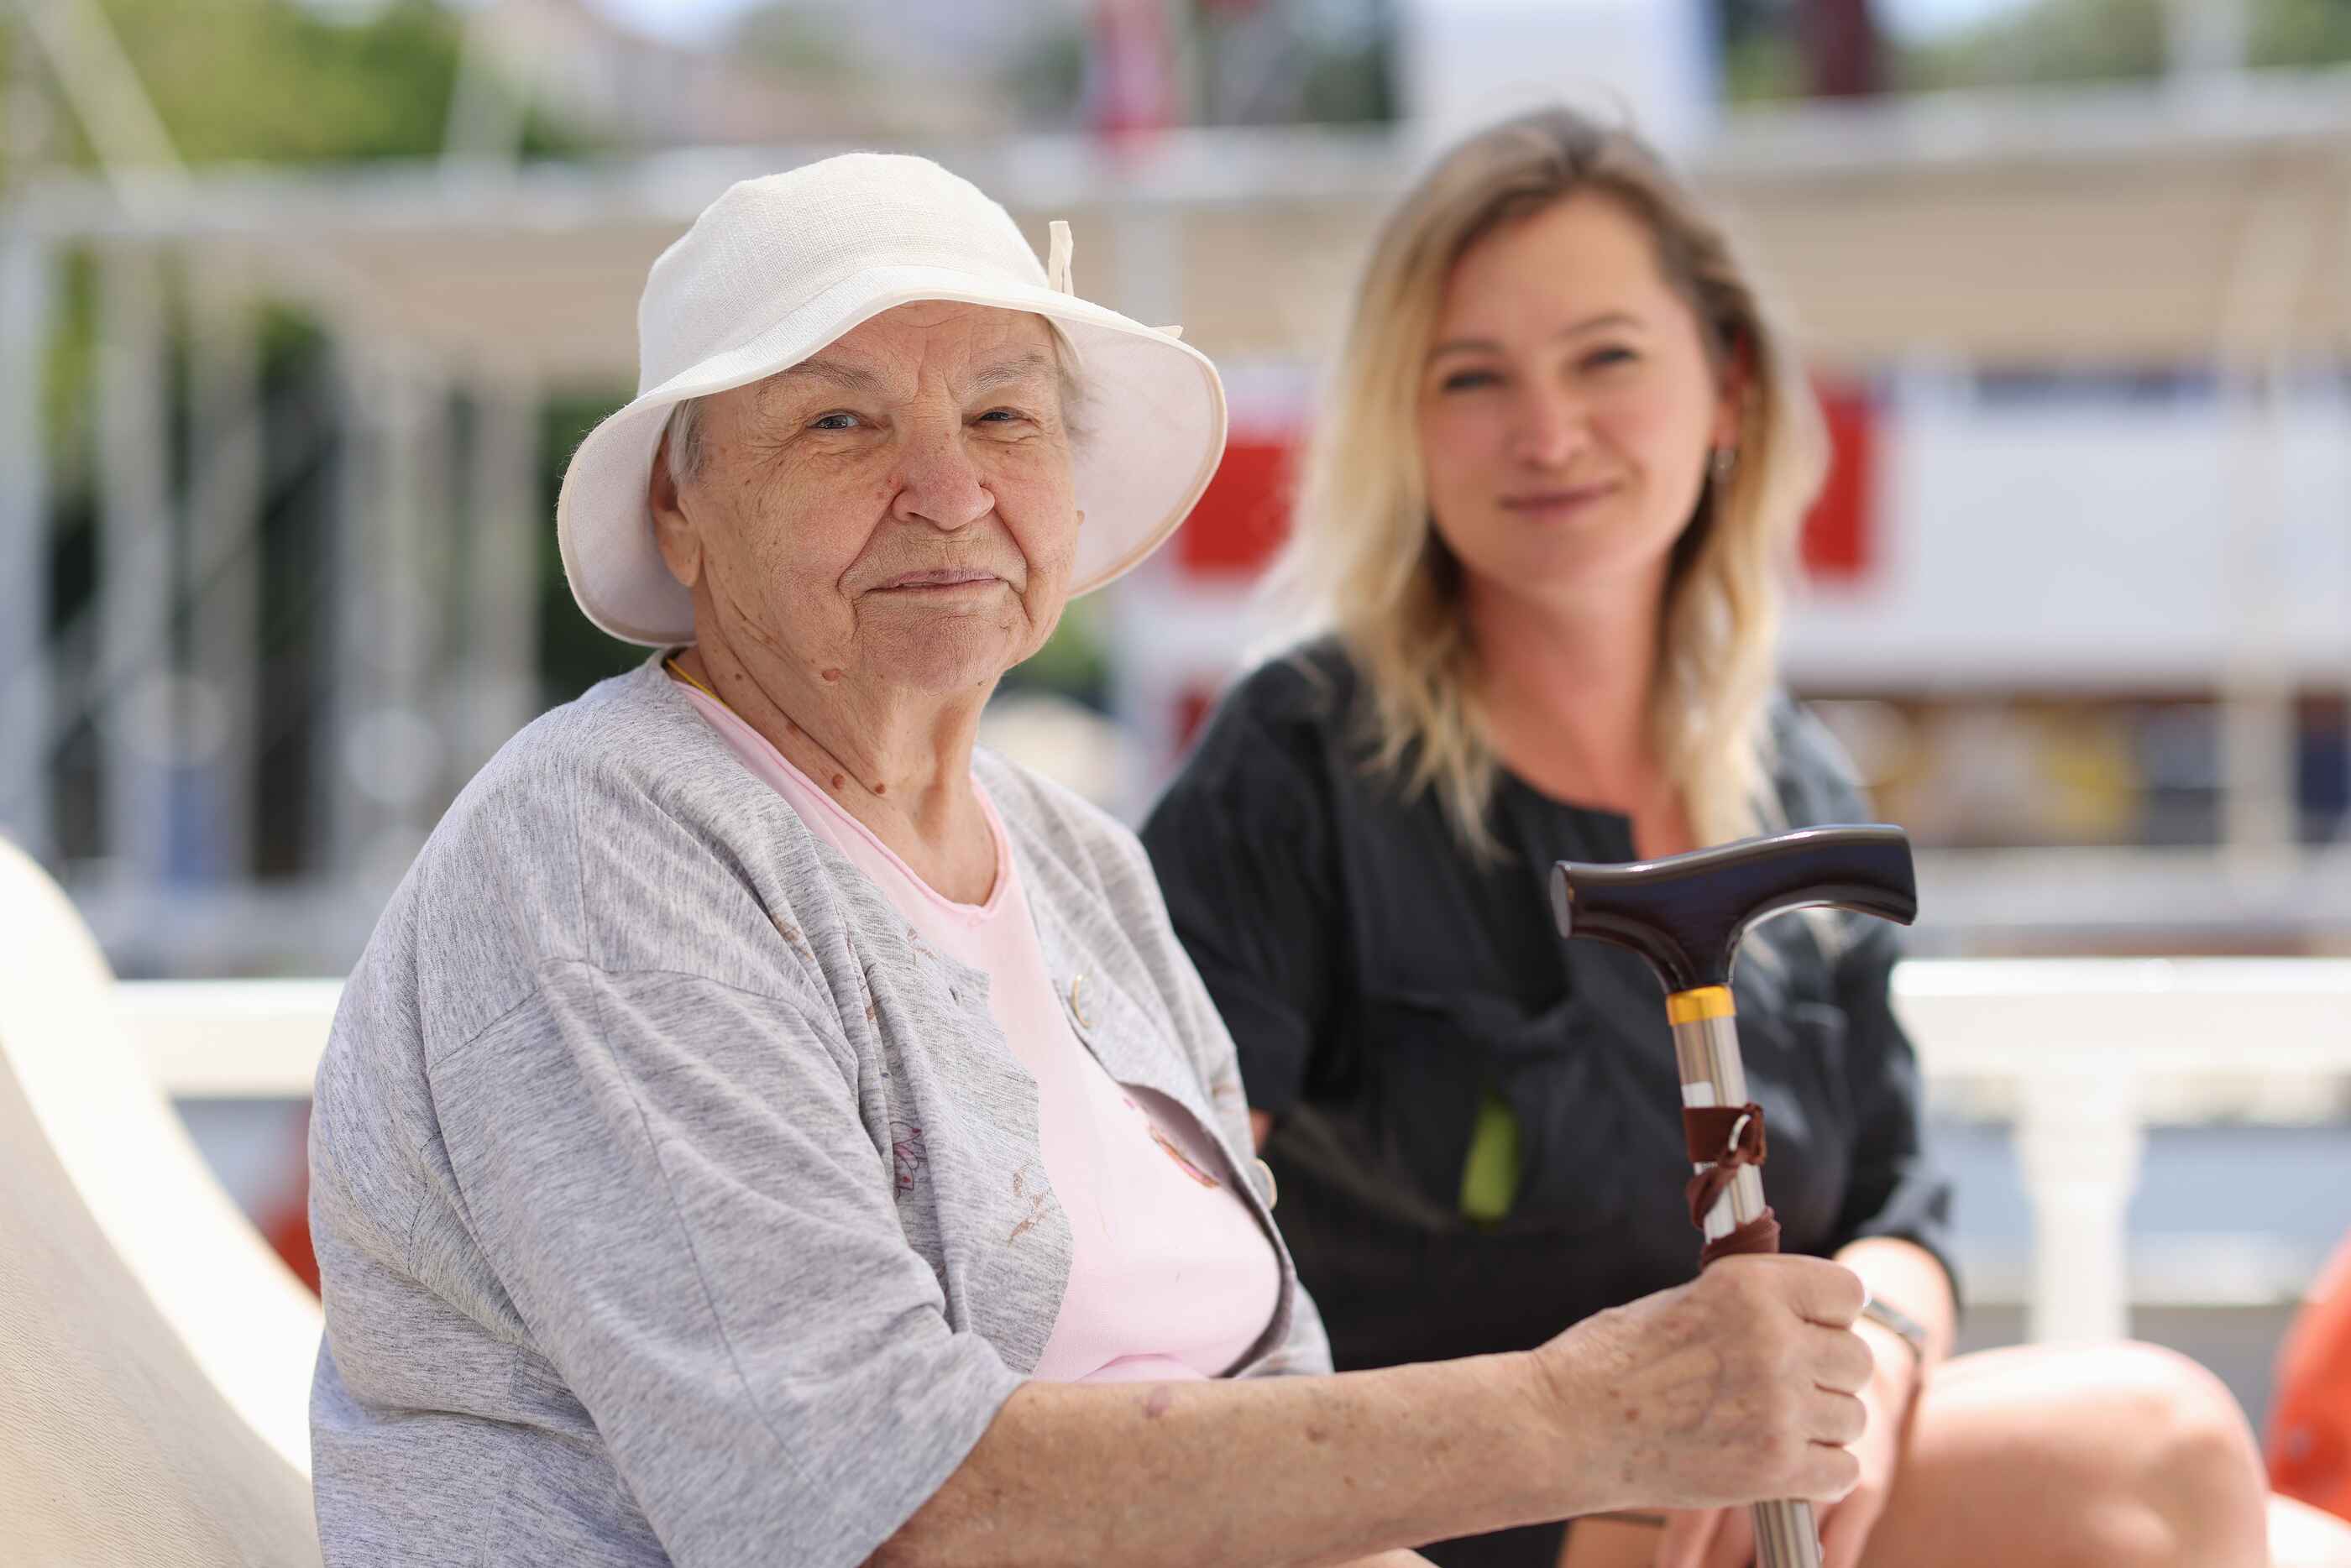 An older person in a hat sits with a younger friend